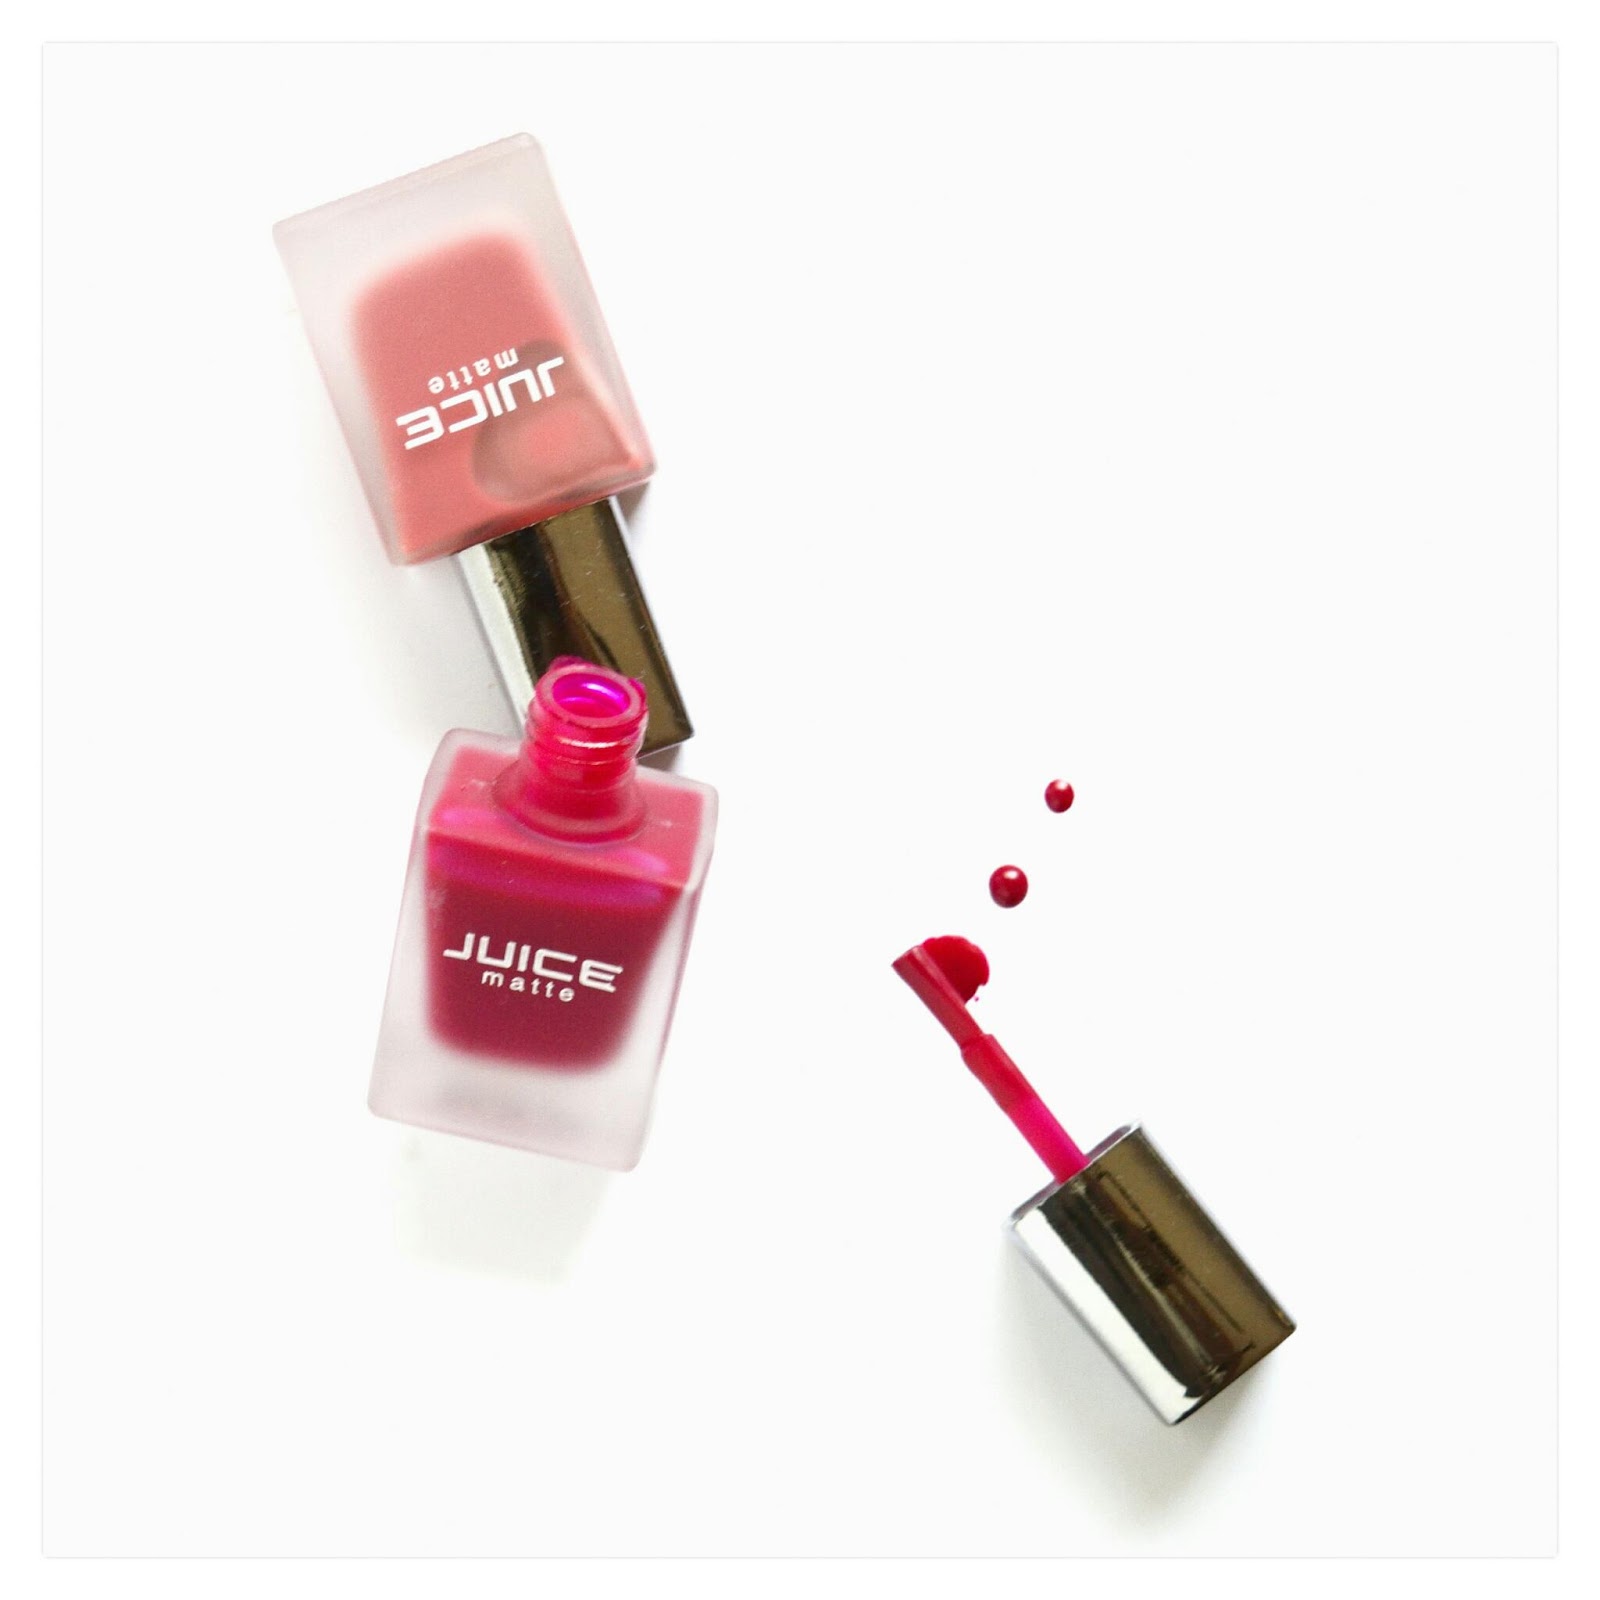 Buy JUICE | NAIL PAINT (PICKLE GREEN - 267 / SKY BLUE - 268 / CORAL SUNSET  - 292) & LIPTINT (DUSTY ROSE M-11) | WATERPROOF & LONG LASTING | COMBO OF 4  Online at Low Prices in India - Amazon.in